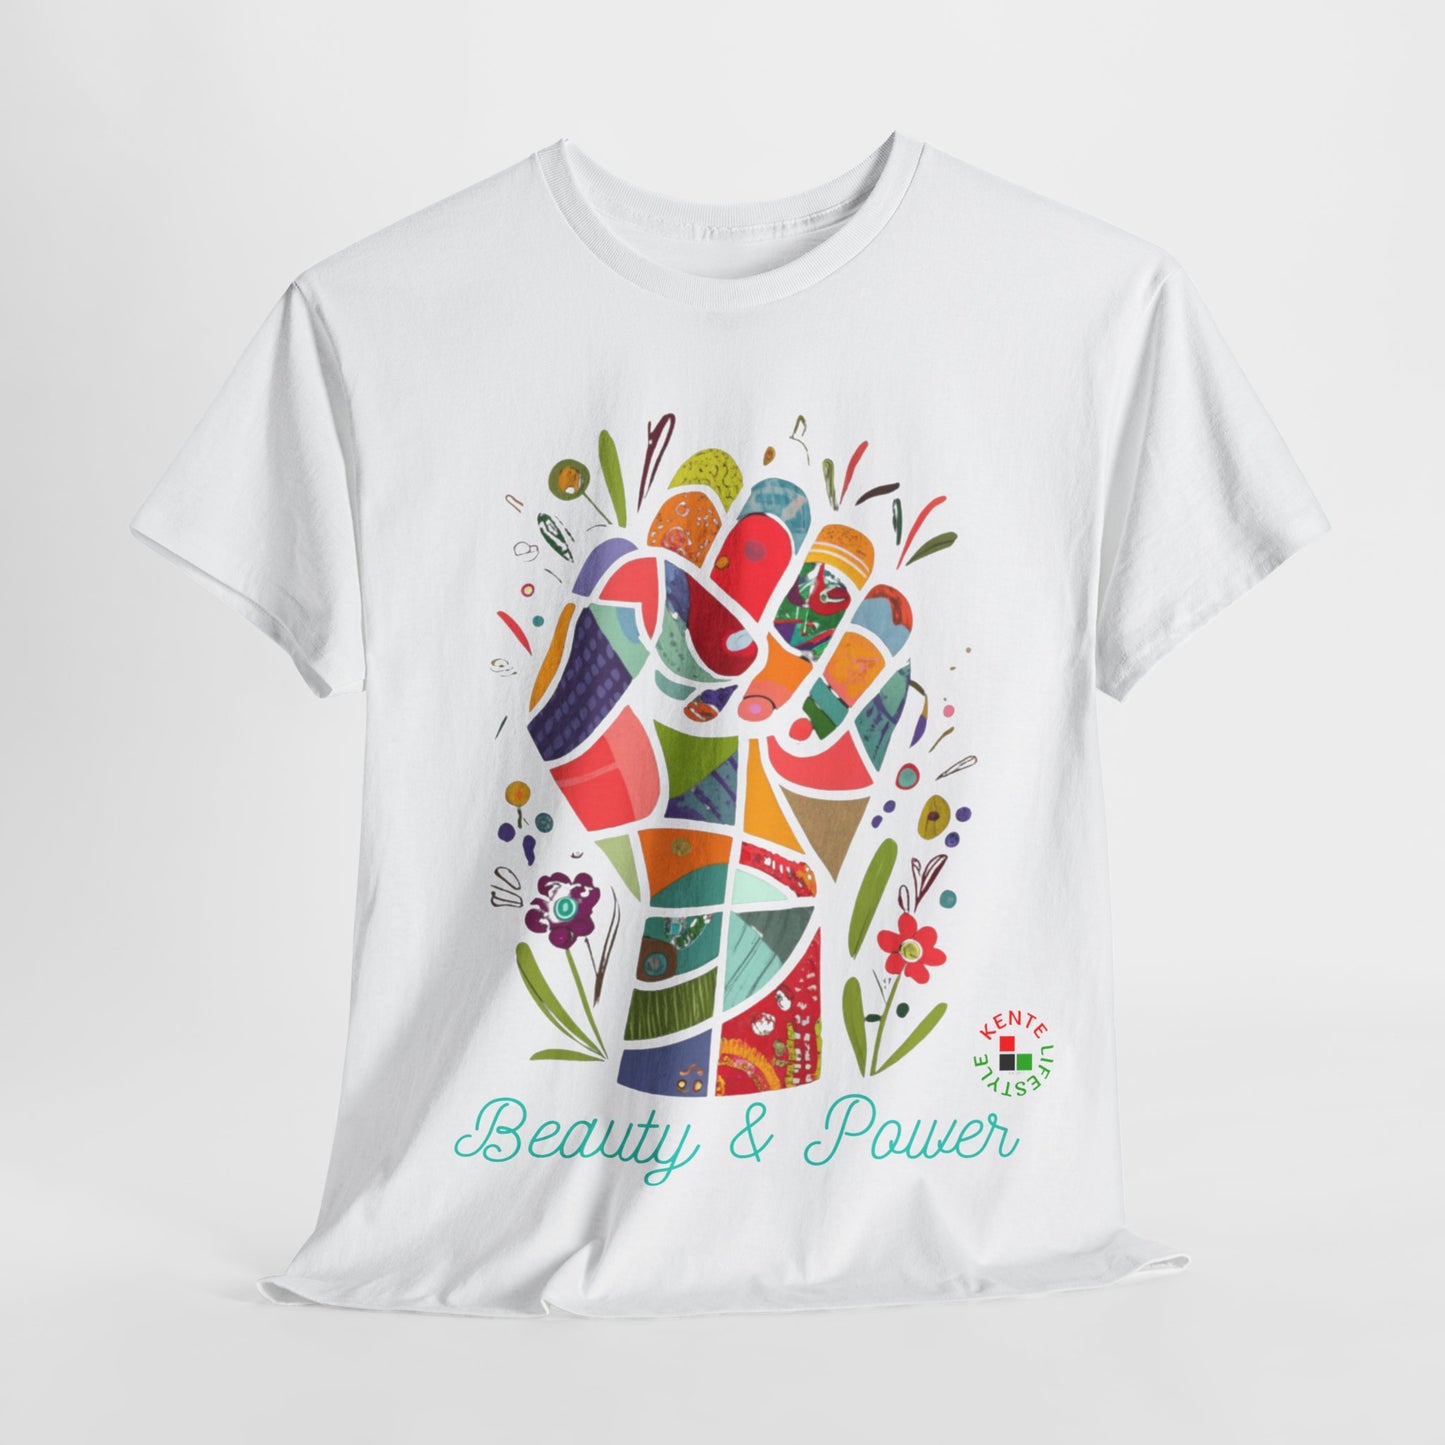 "Beauty and Power" T-shirt